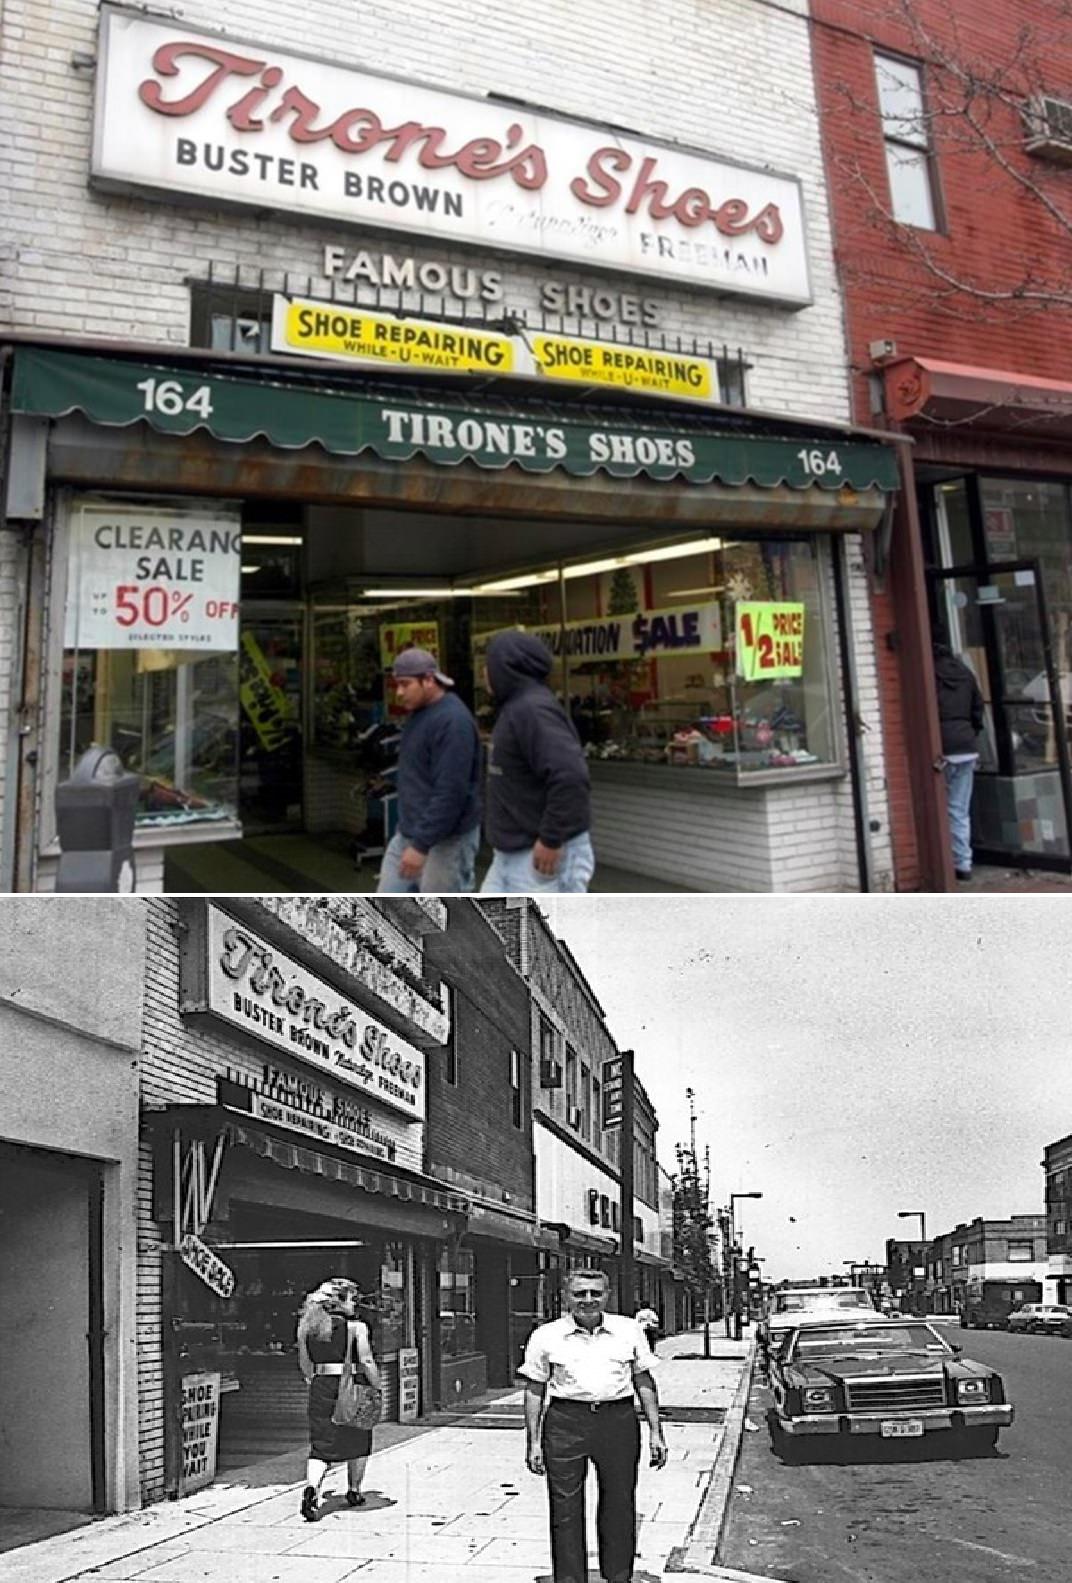 Closing Of Tirone'S Shoe Store In 2010 Marked An End Of An Era For 164 Port Richmond Avenue. Second Photo Is From 2010